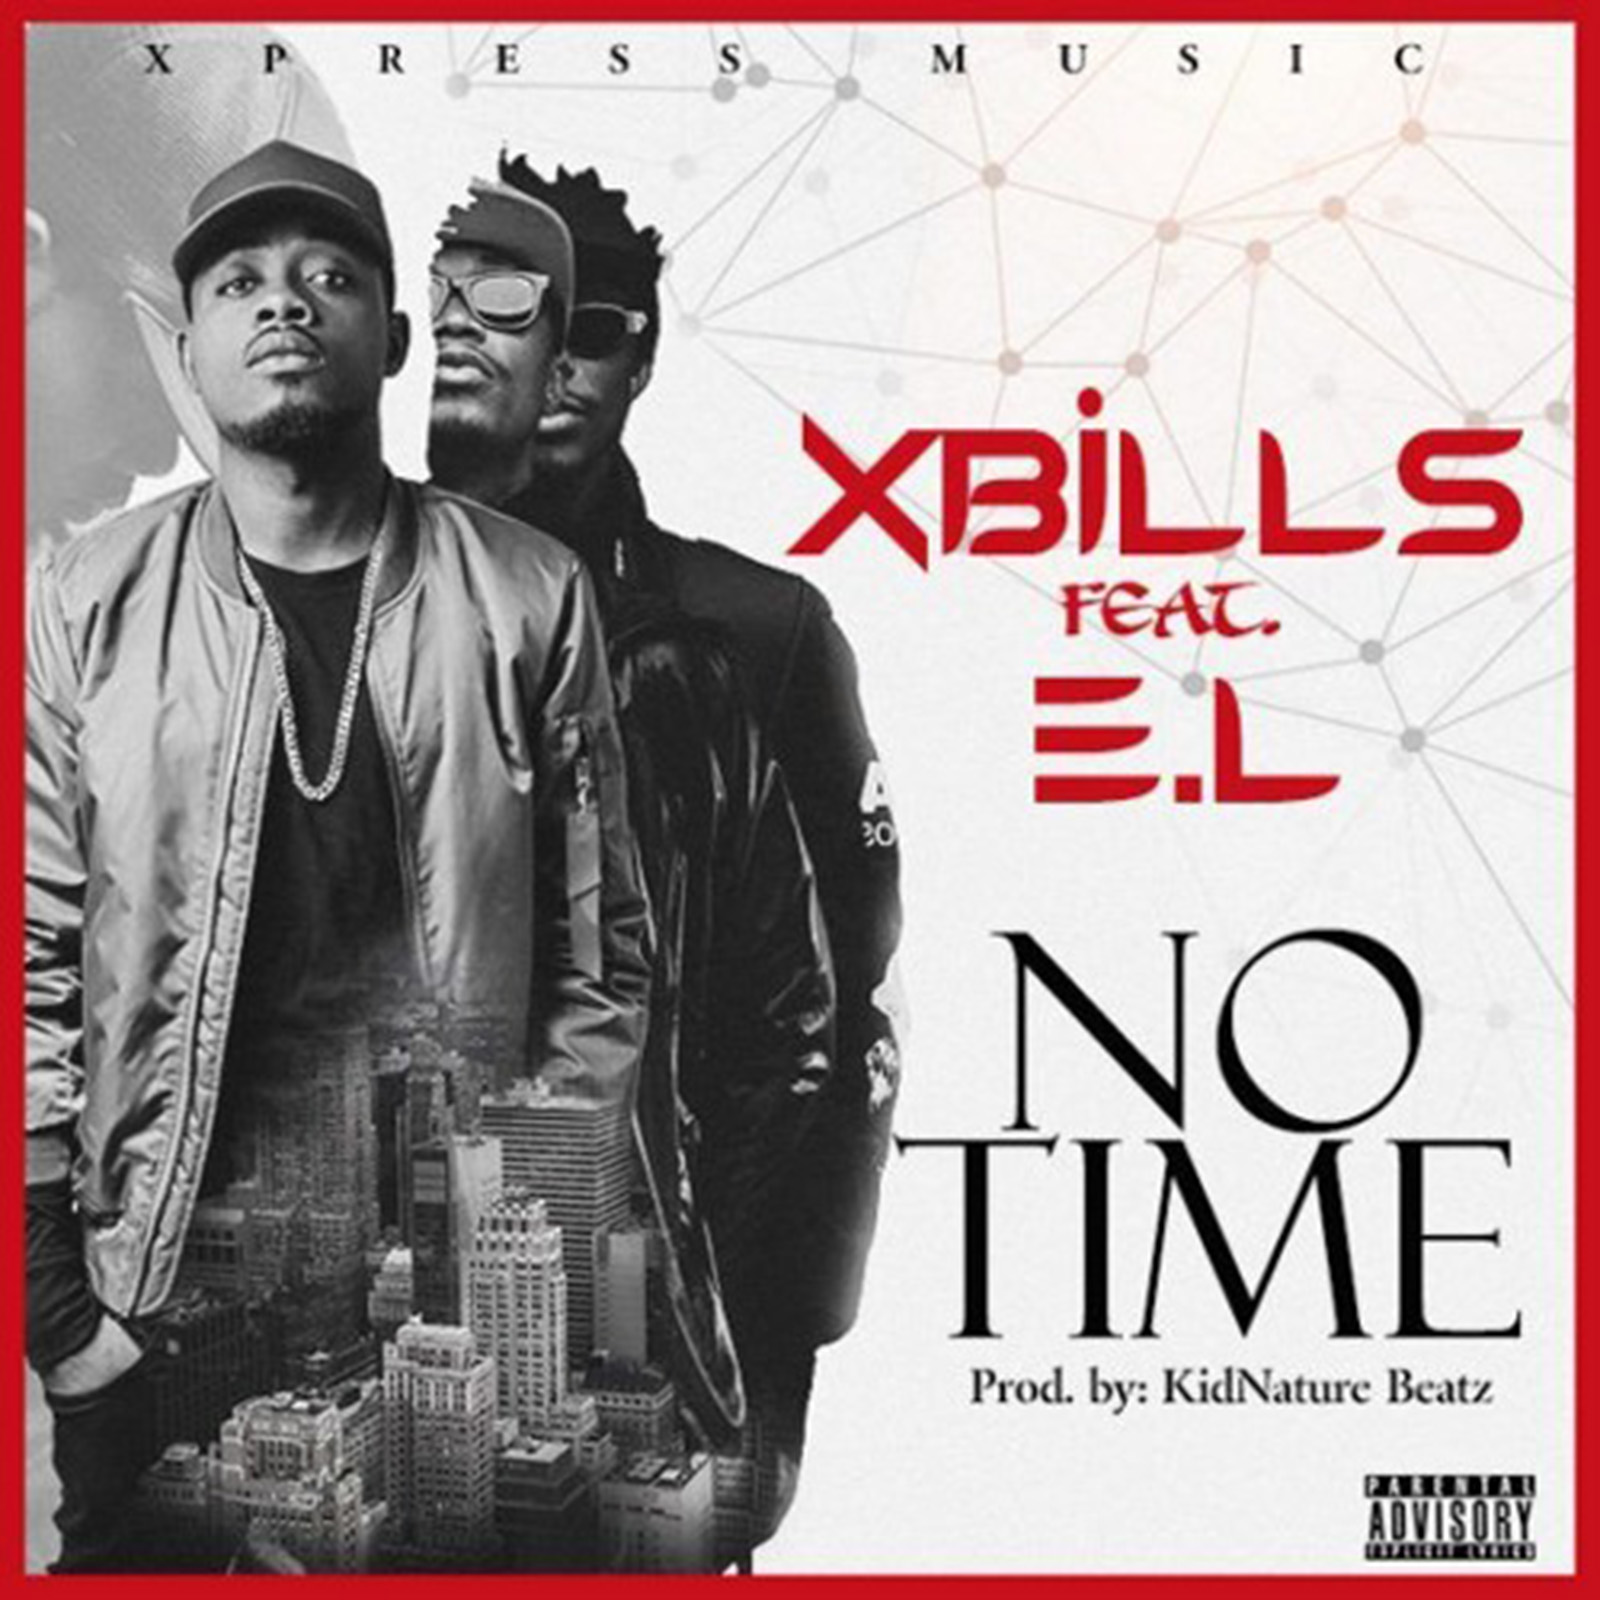 No Time by Xbills feat. E.L